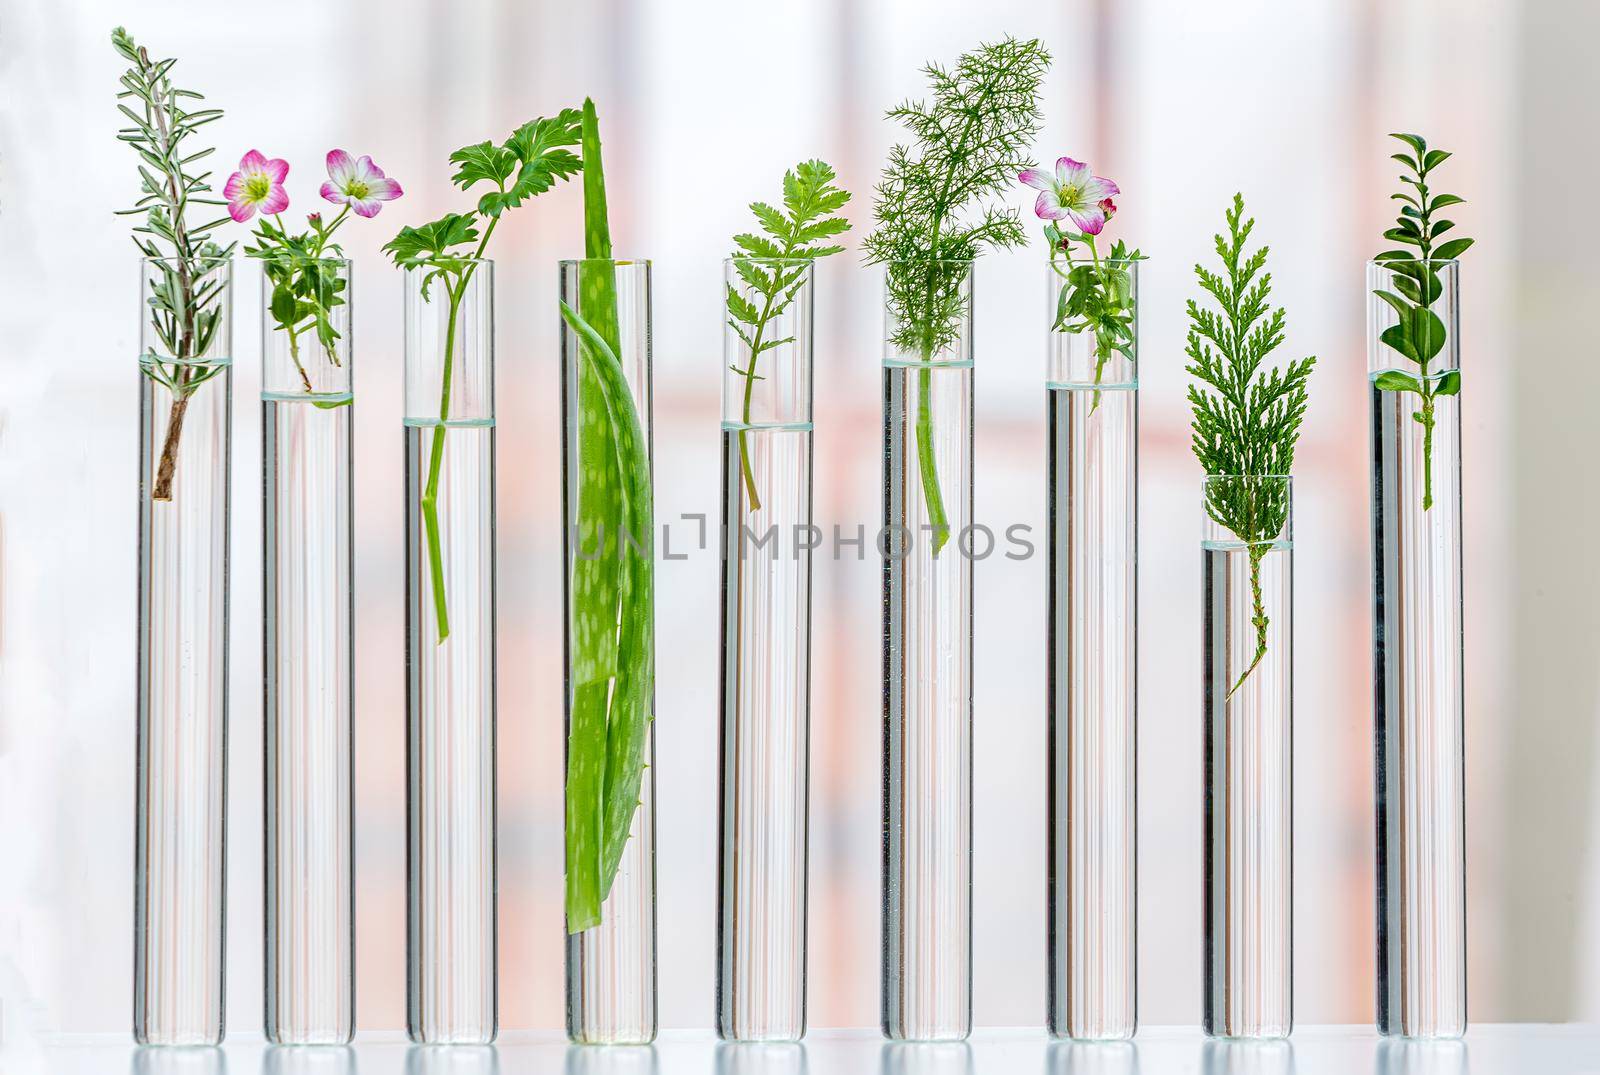 Flowers and medicinal plants aligned in test tubes showing transparency